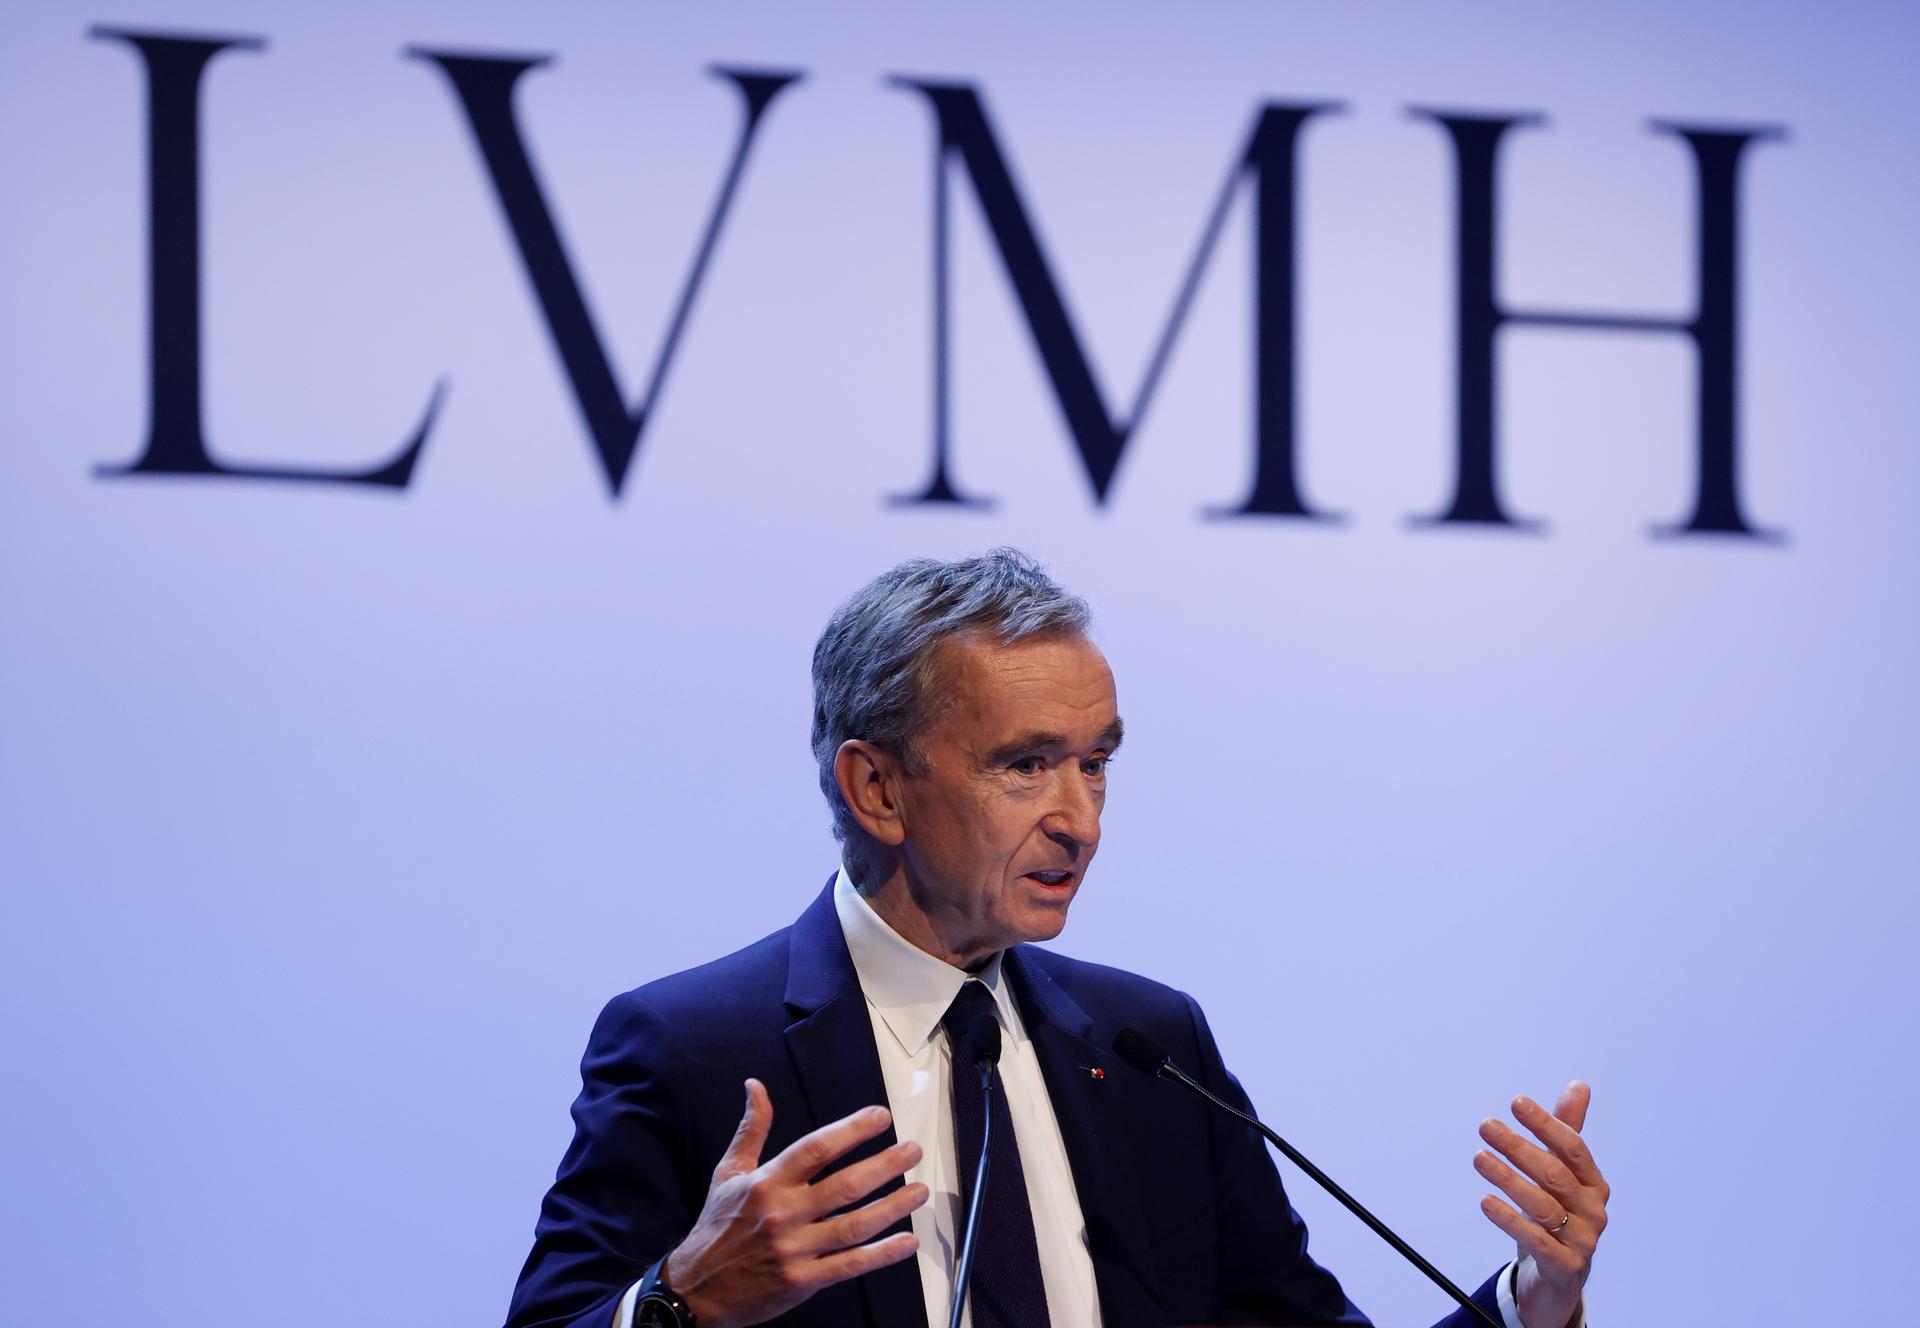 Birkenstock, Once a Fashion Faux Pas, Snapped Up by LVMH's Arnault